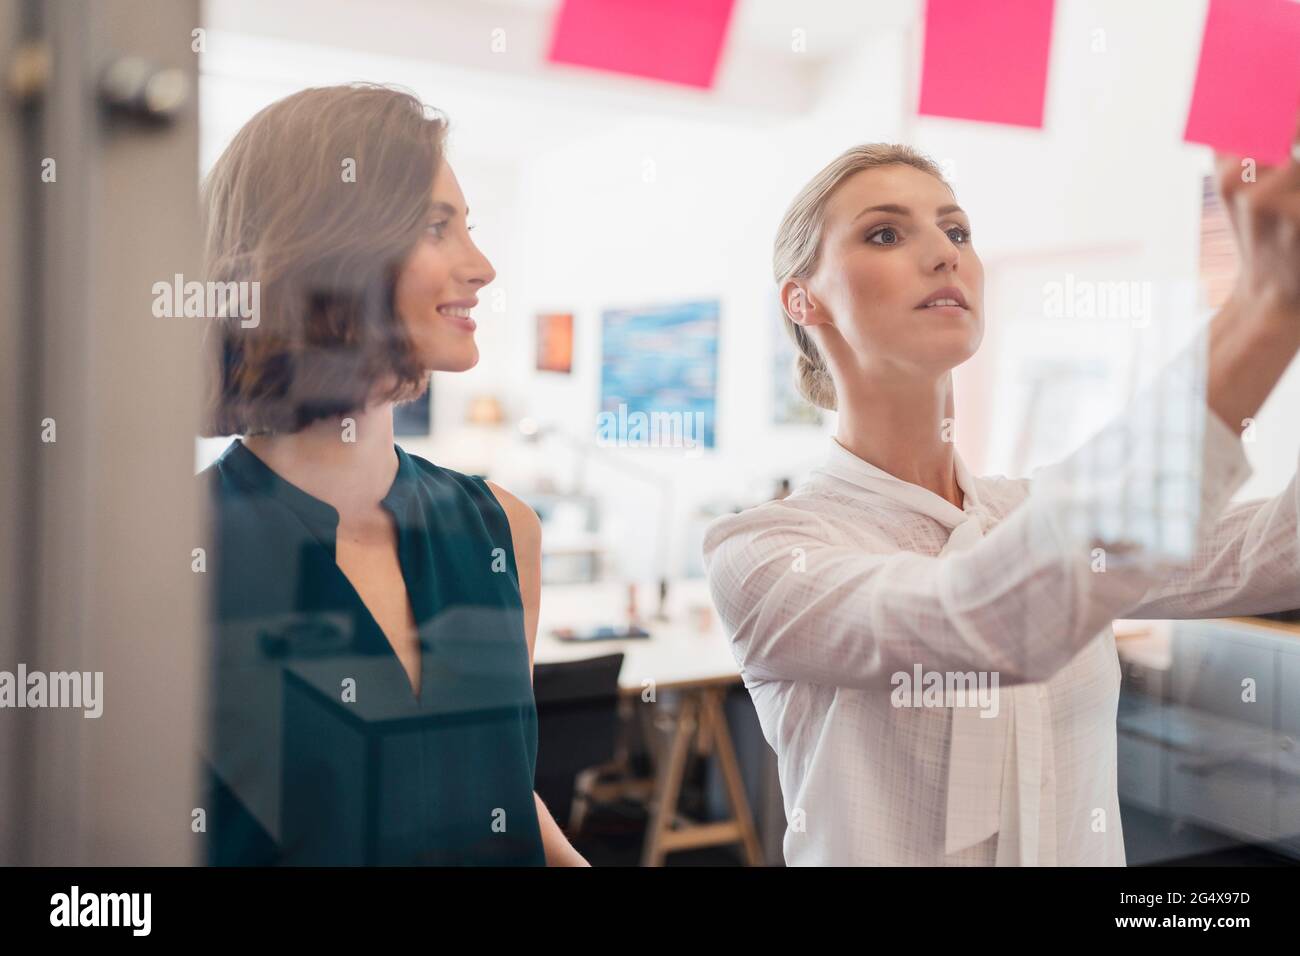 Smiling businesswoman looking at female colleague working in office seem through glass Stock Photo